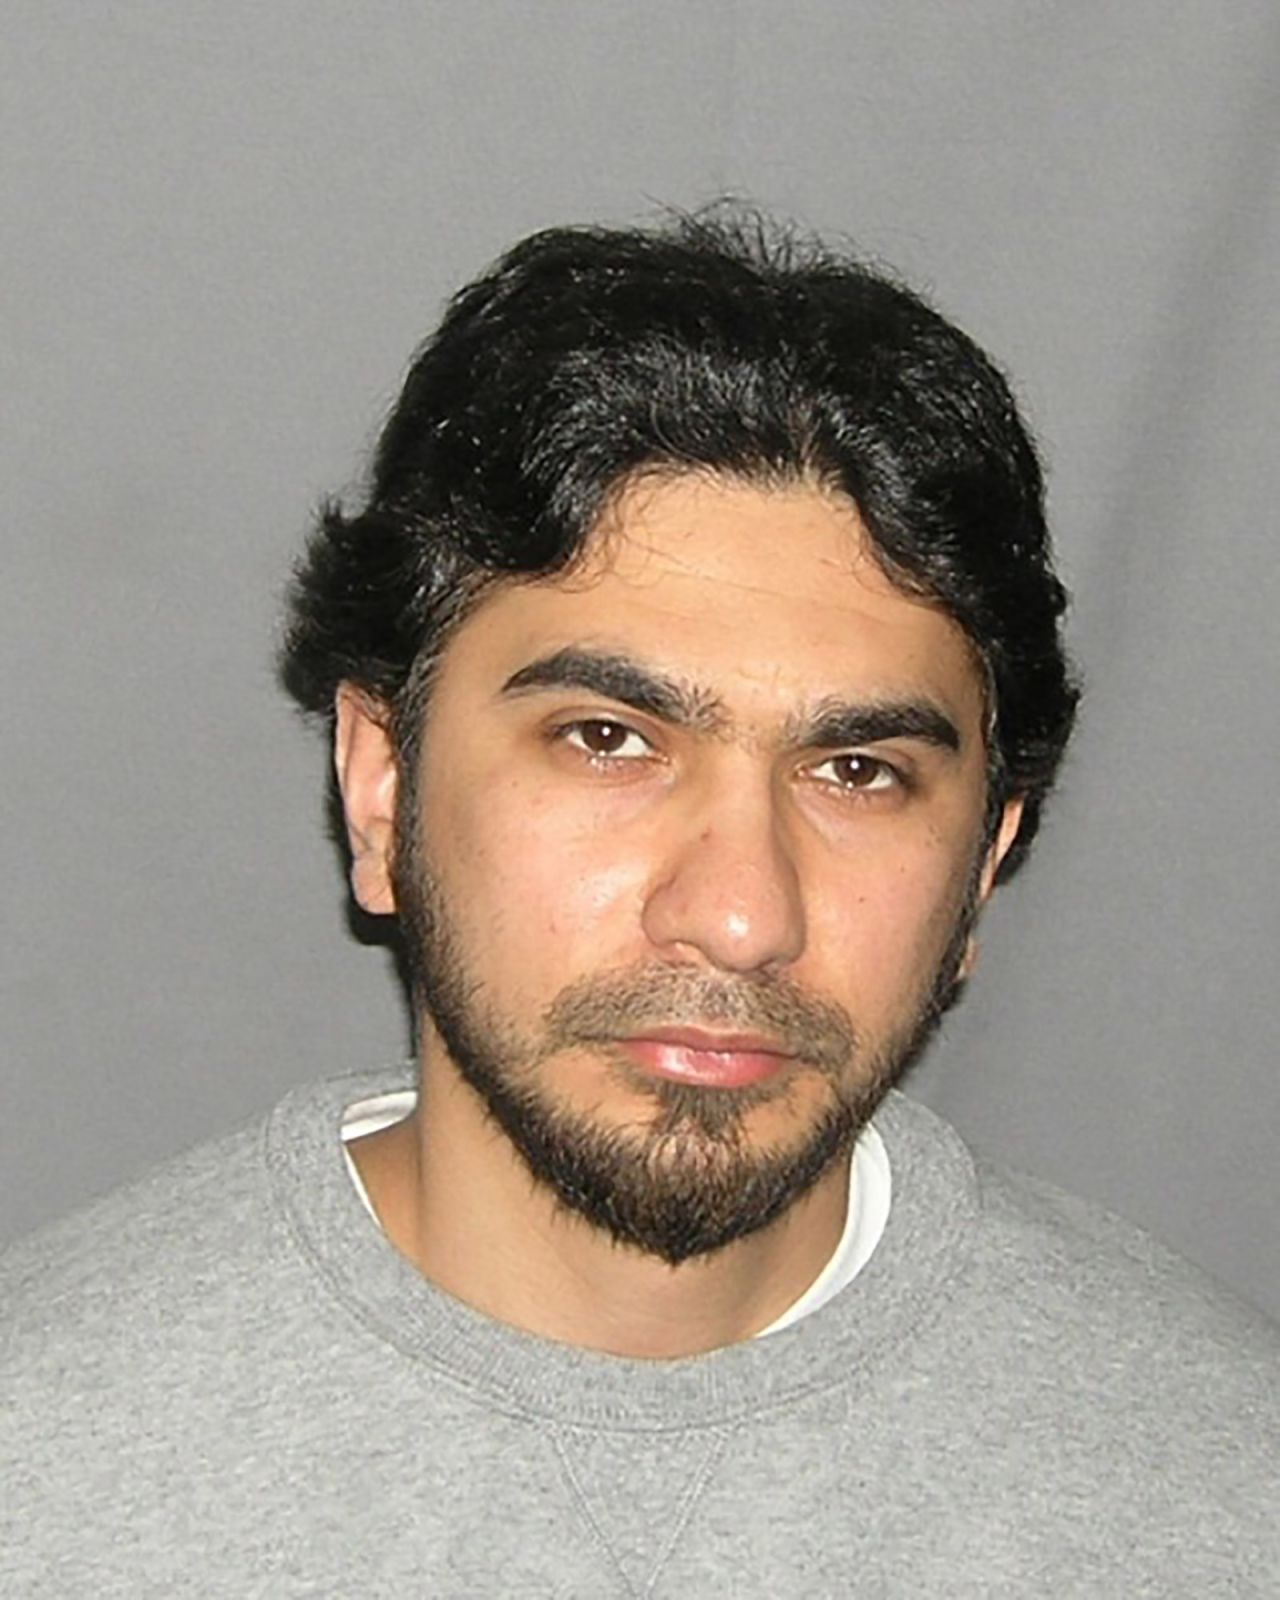 Faisal Shahzad is serving a life sentence for trying to detonate a car bomb in New York's Times Square in May 2010.